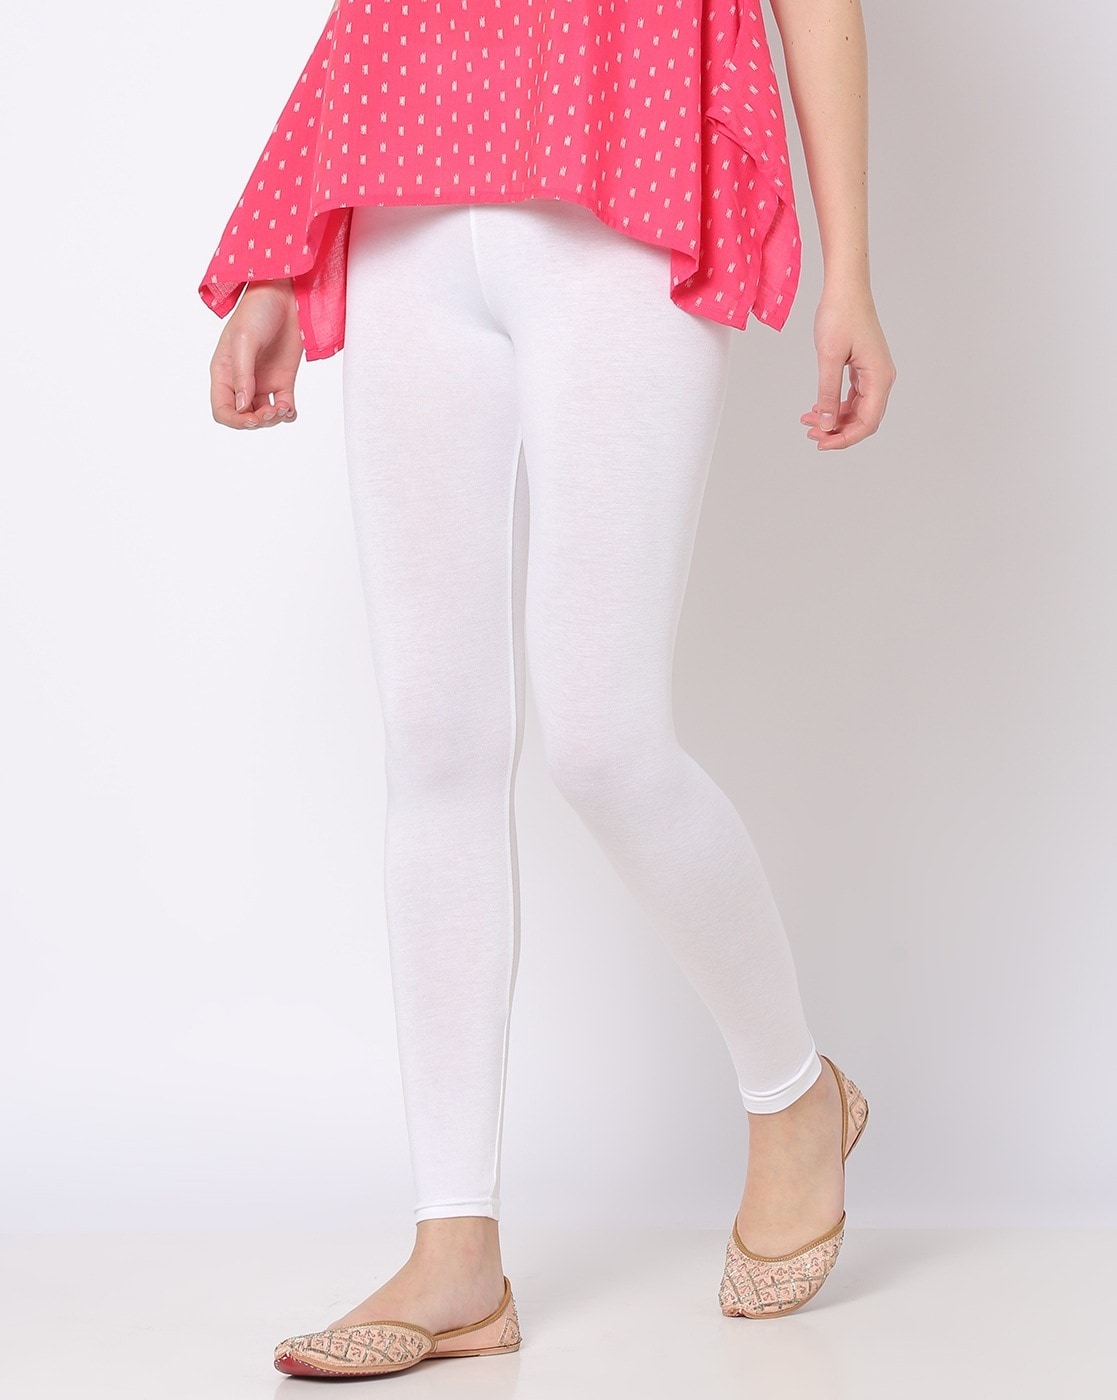 Avaasa Ankle Length Leggings in Valsad - Dealers, Manufacturers & Suppliers  - Justdial